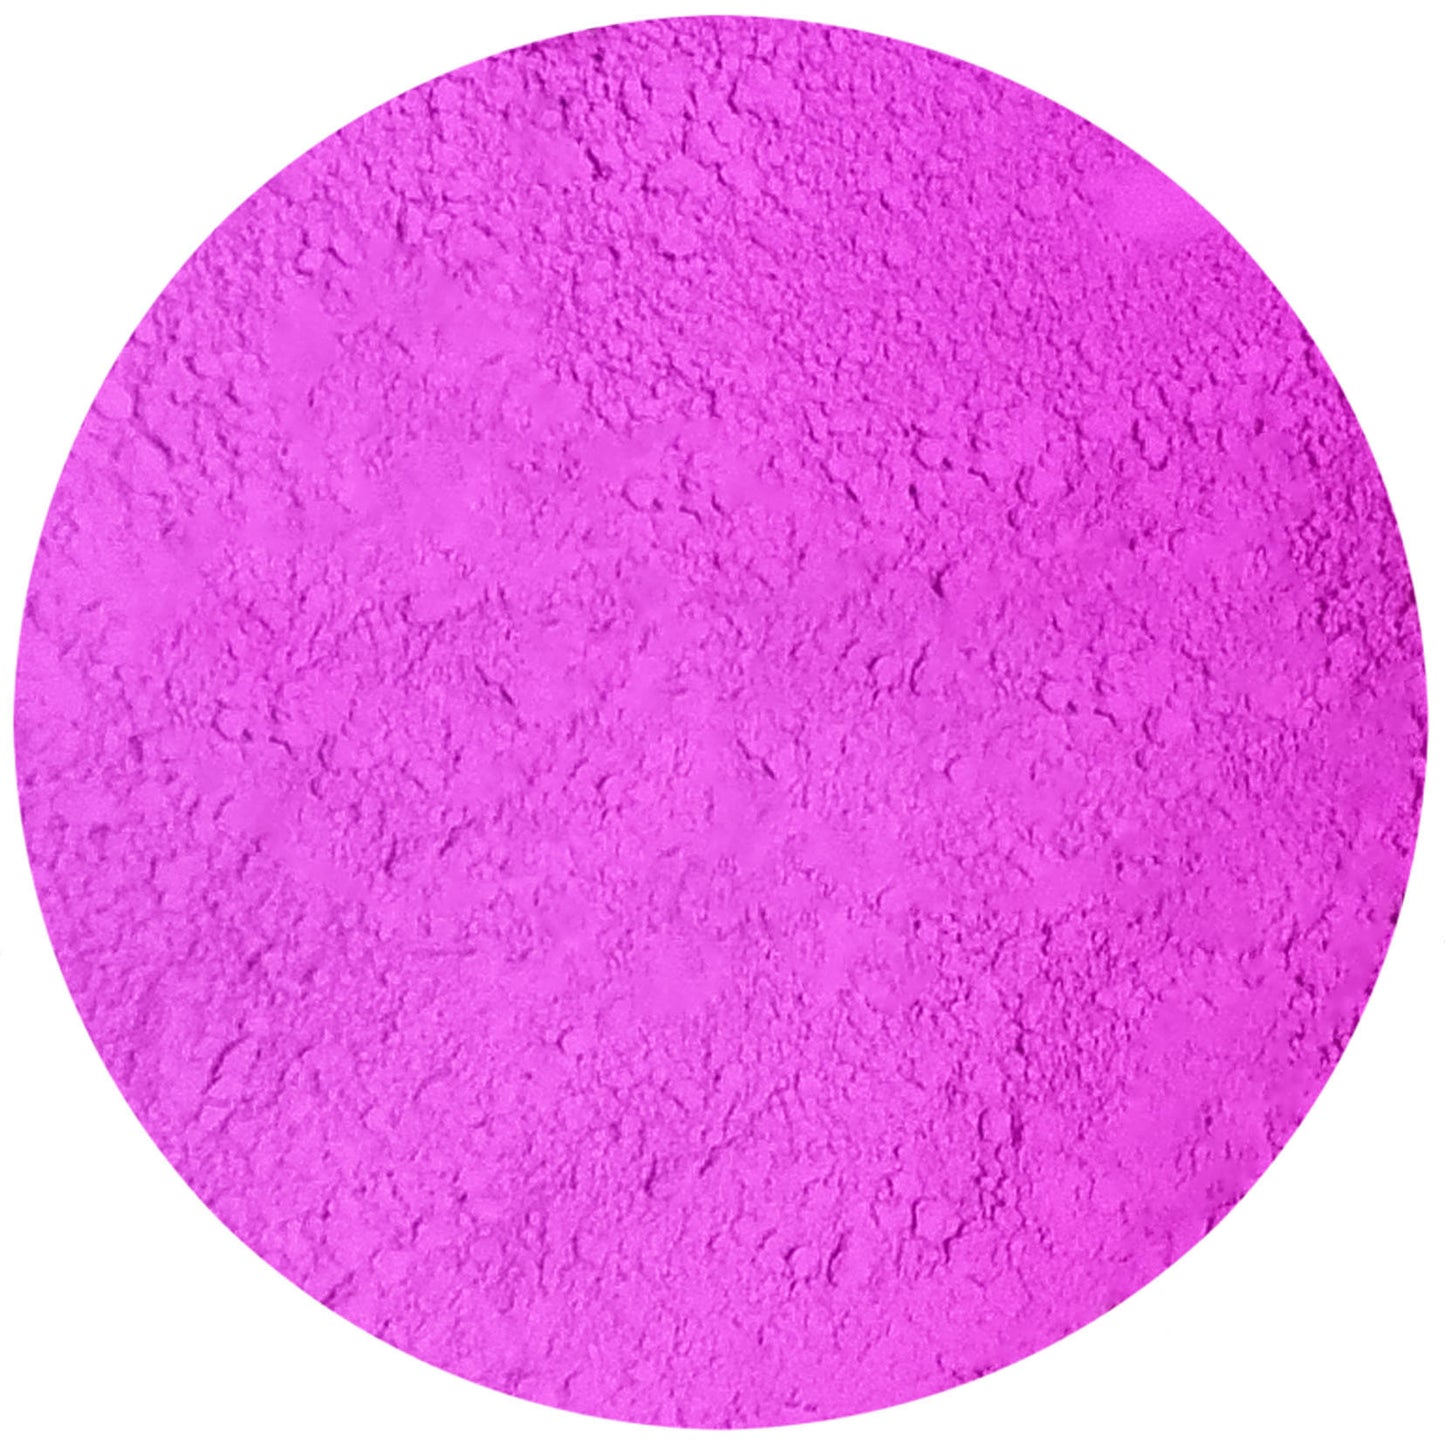 Neon Purple Fluorescent Dye, Cosmetic Safe, Candles, Wax Melts